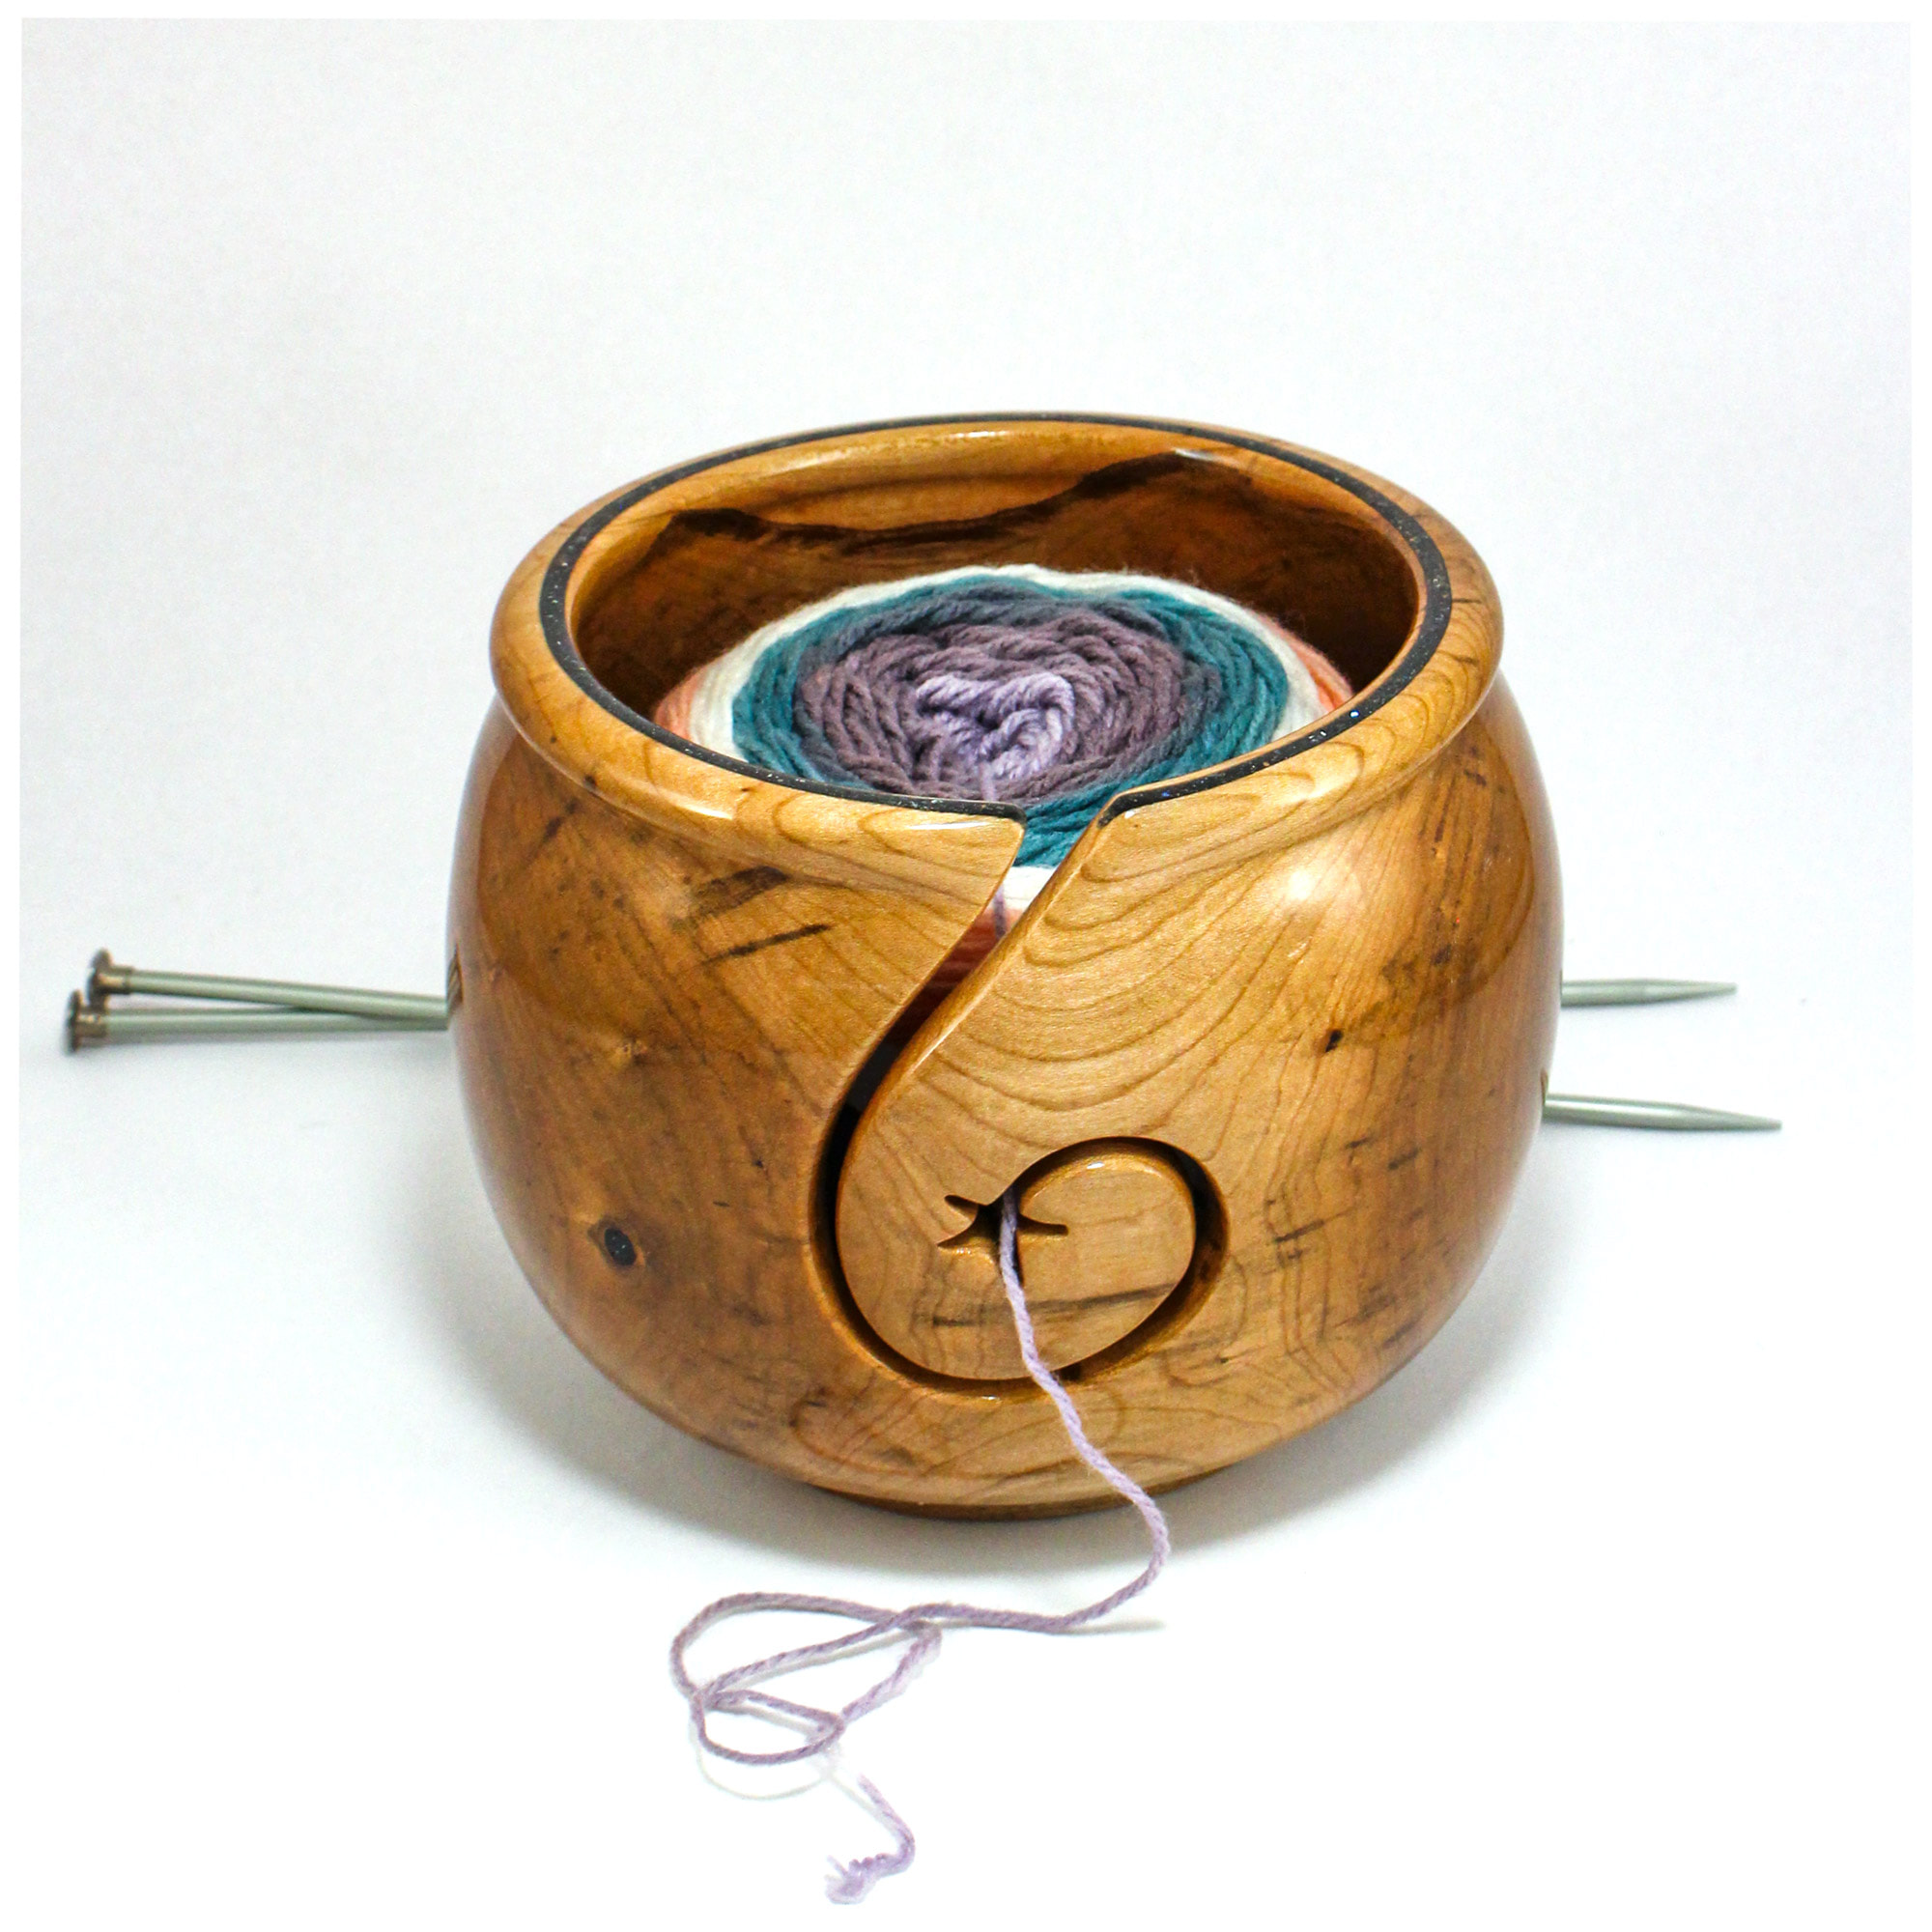 Extra Large Cherry Yarn Bowl with Sparkle Inlay For Knitting, Crochet,  Yarning #700